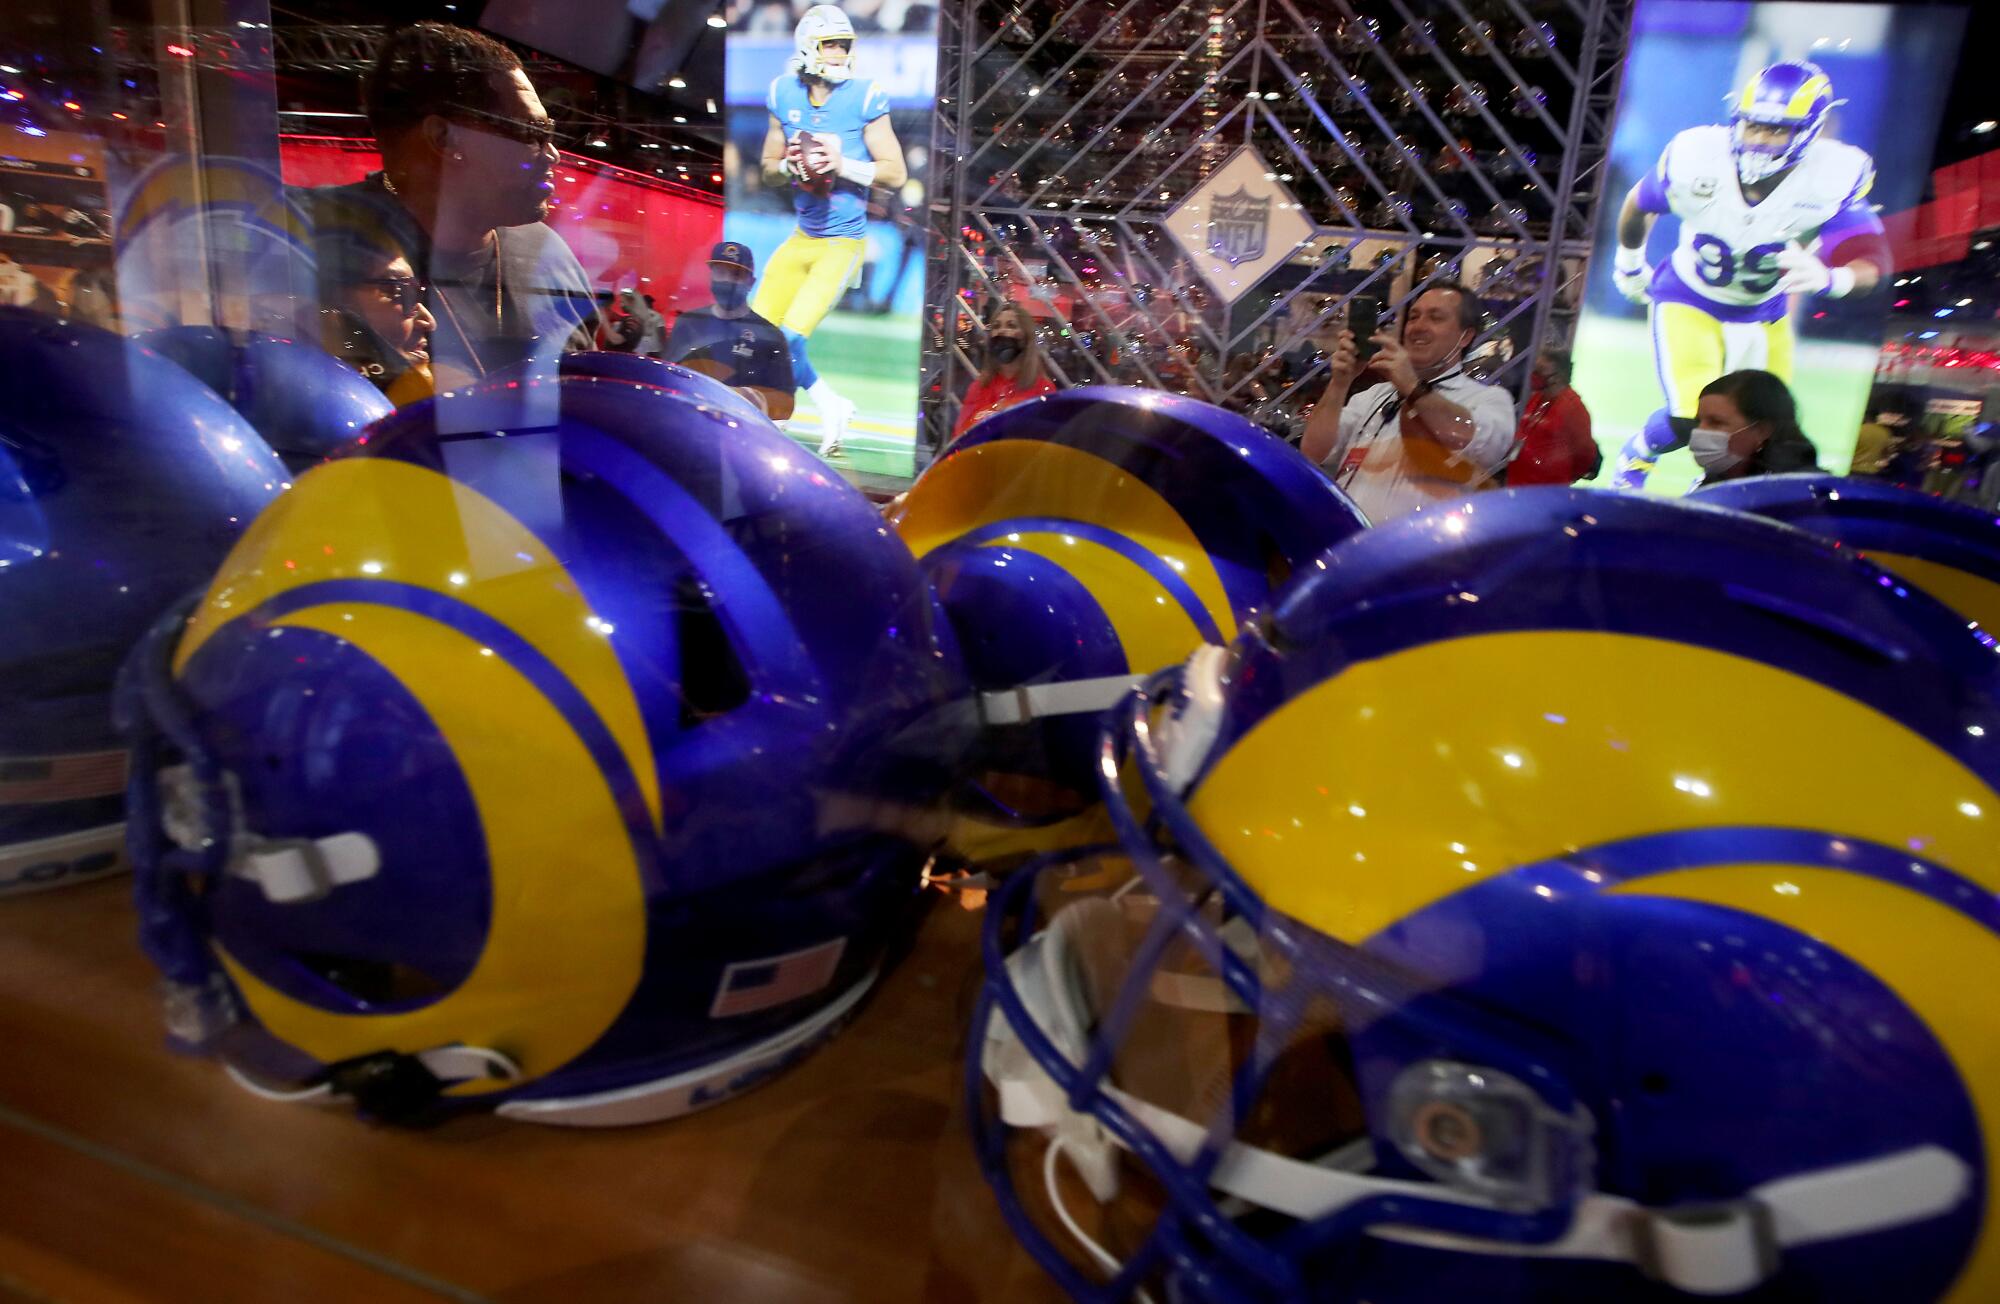 Fans take pictures at a display featuring the Los Angeles Rams and the Los Angeles Chargers.